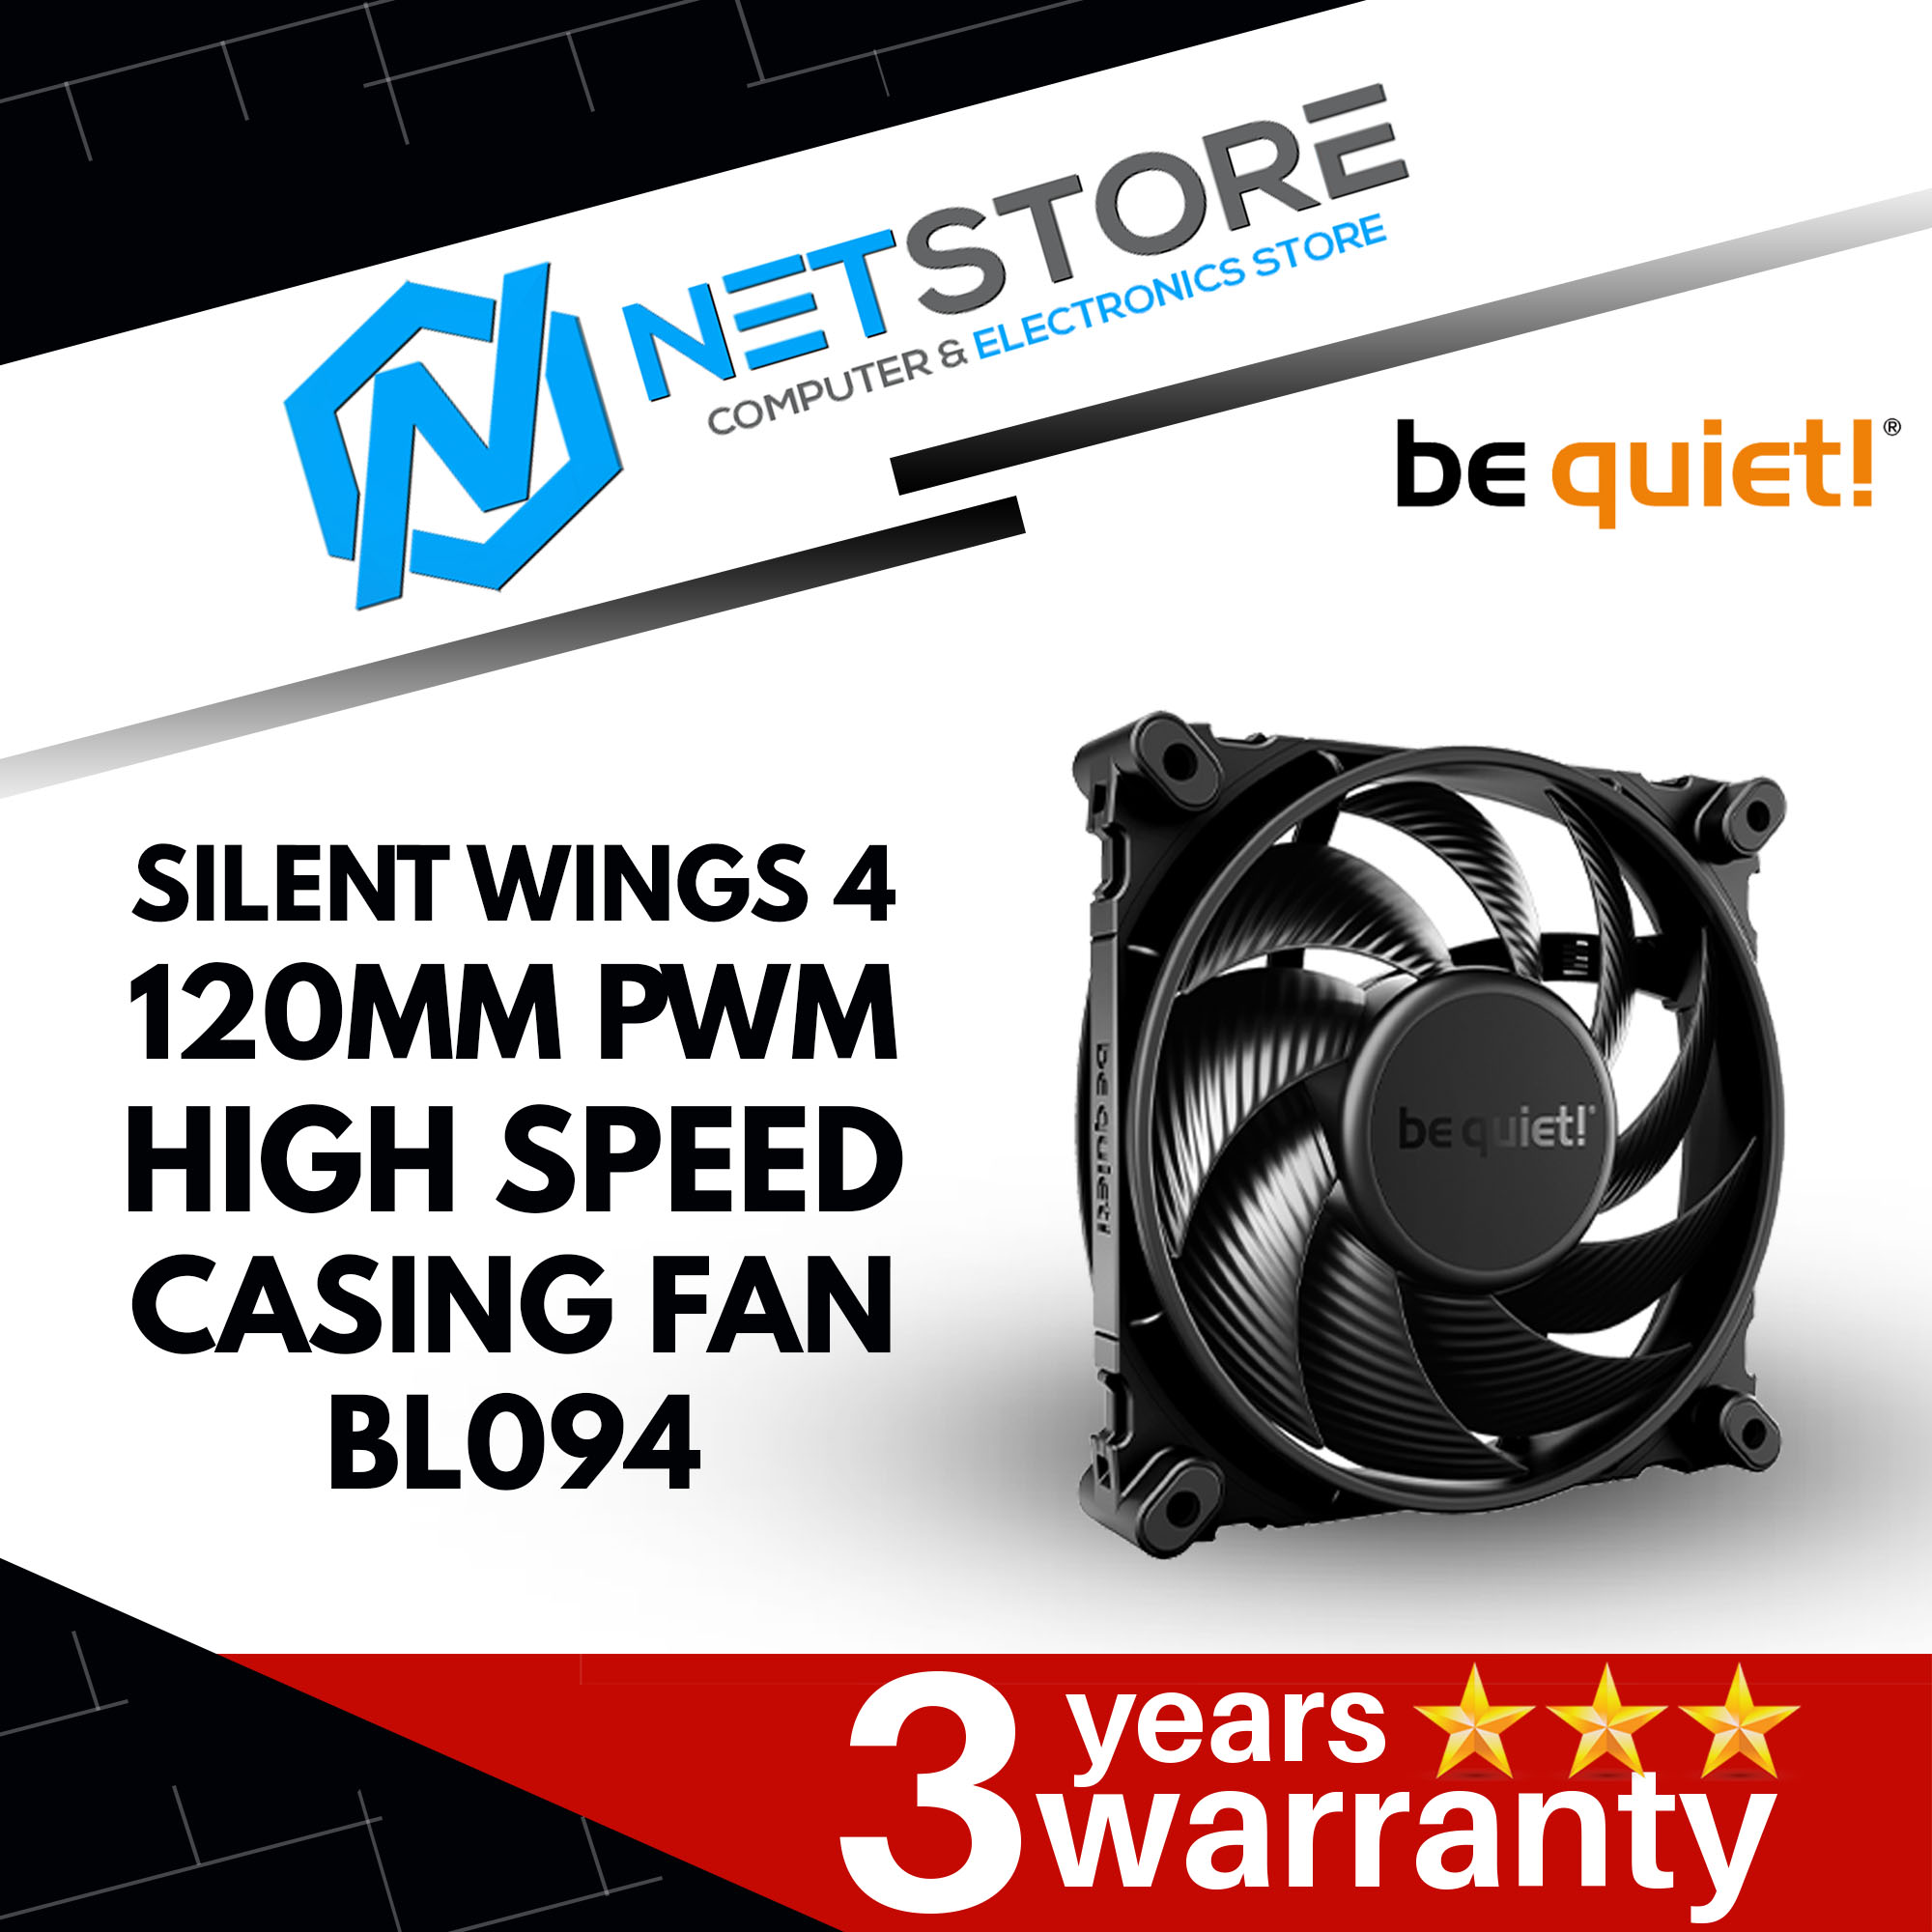 BE QUIET! SILENT WINGS 4 120MM PWMHIGH SPEED CASING FAN - BL094